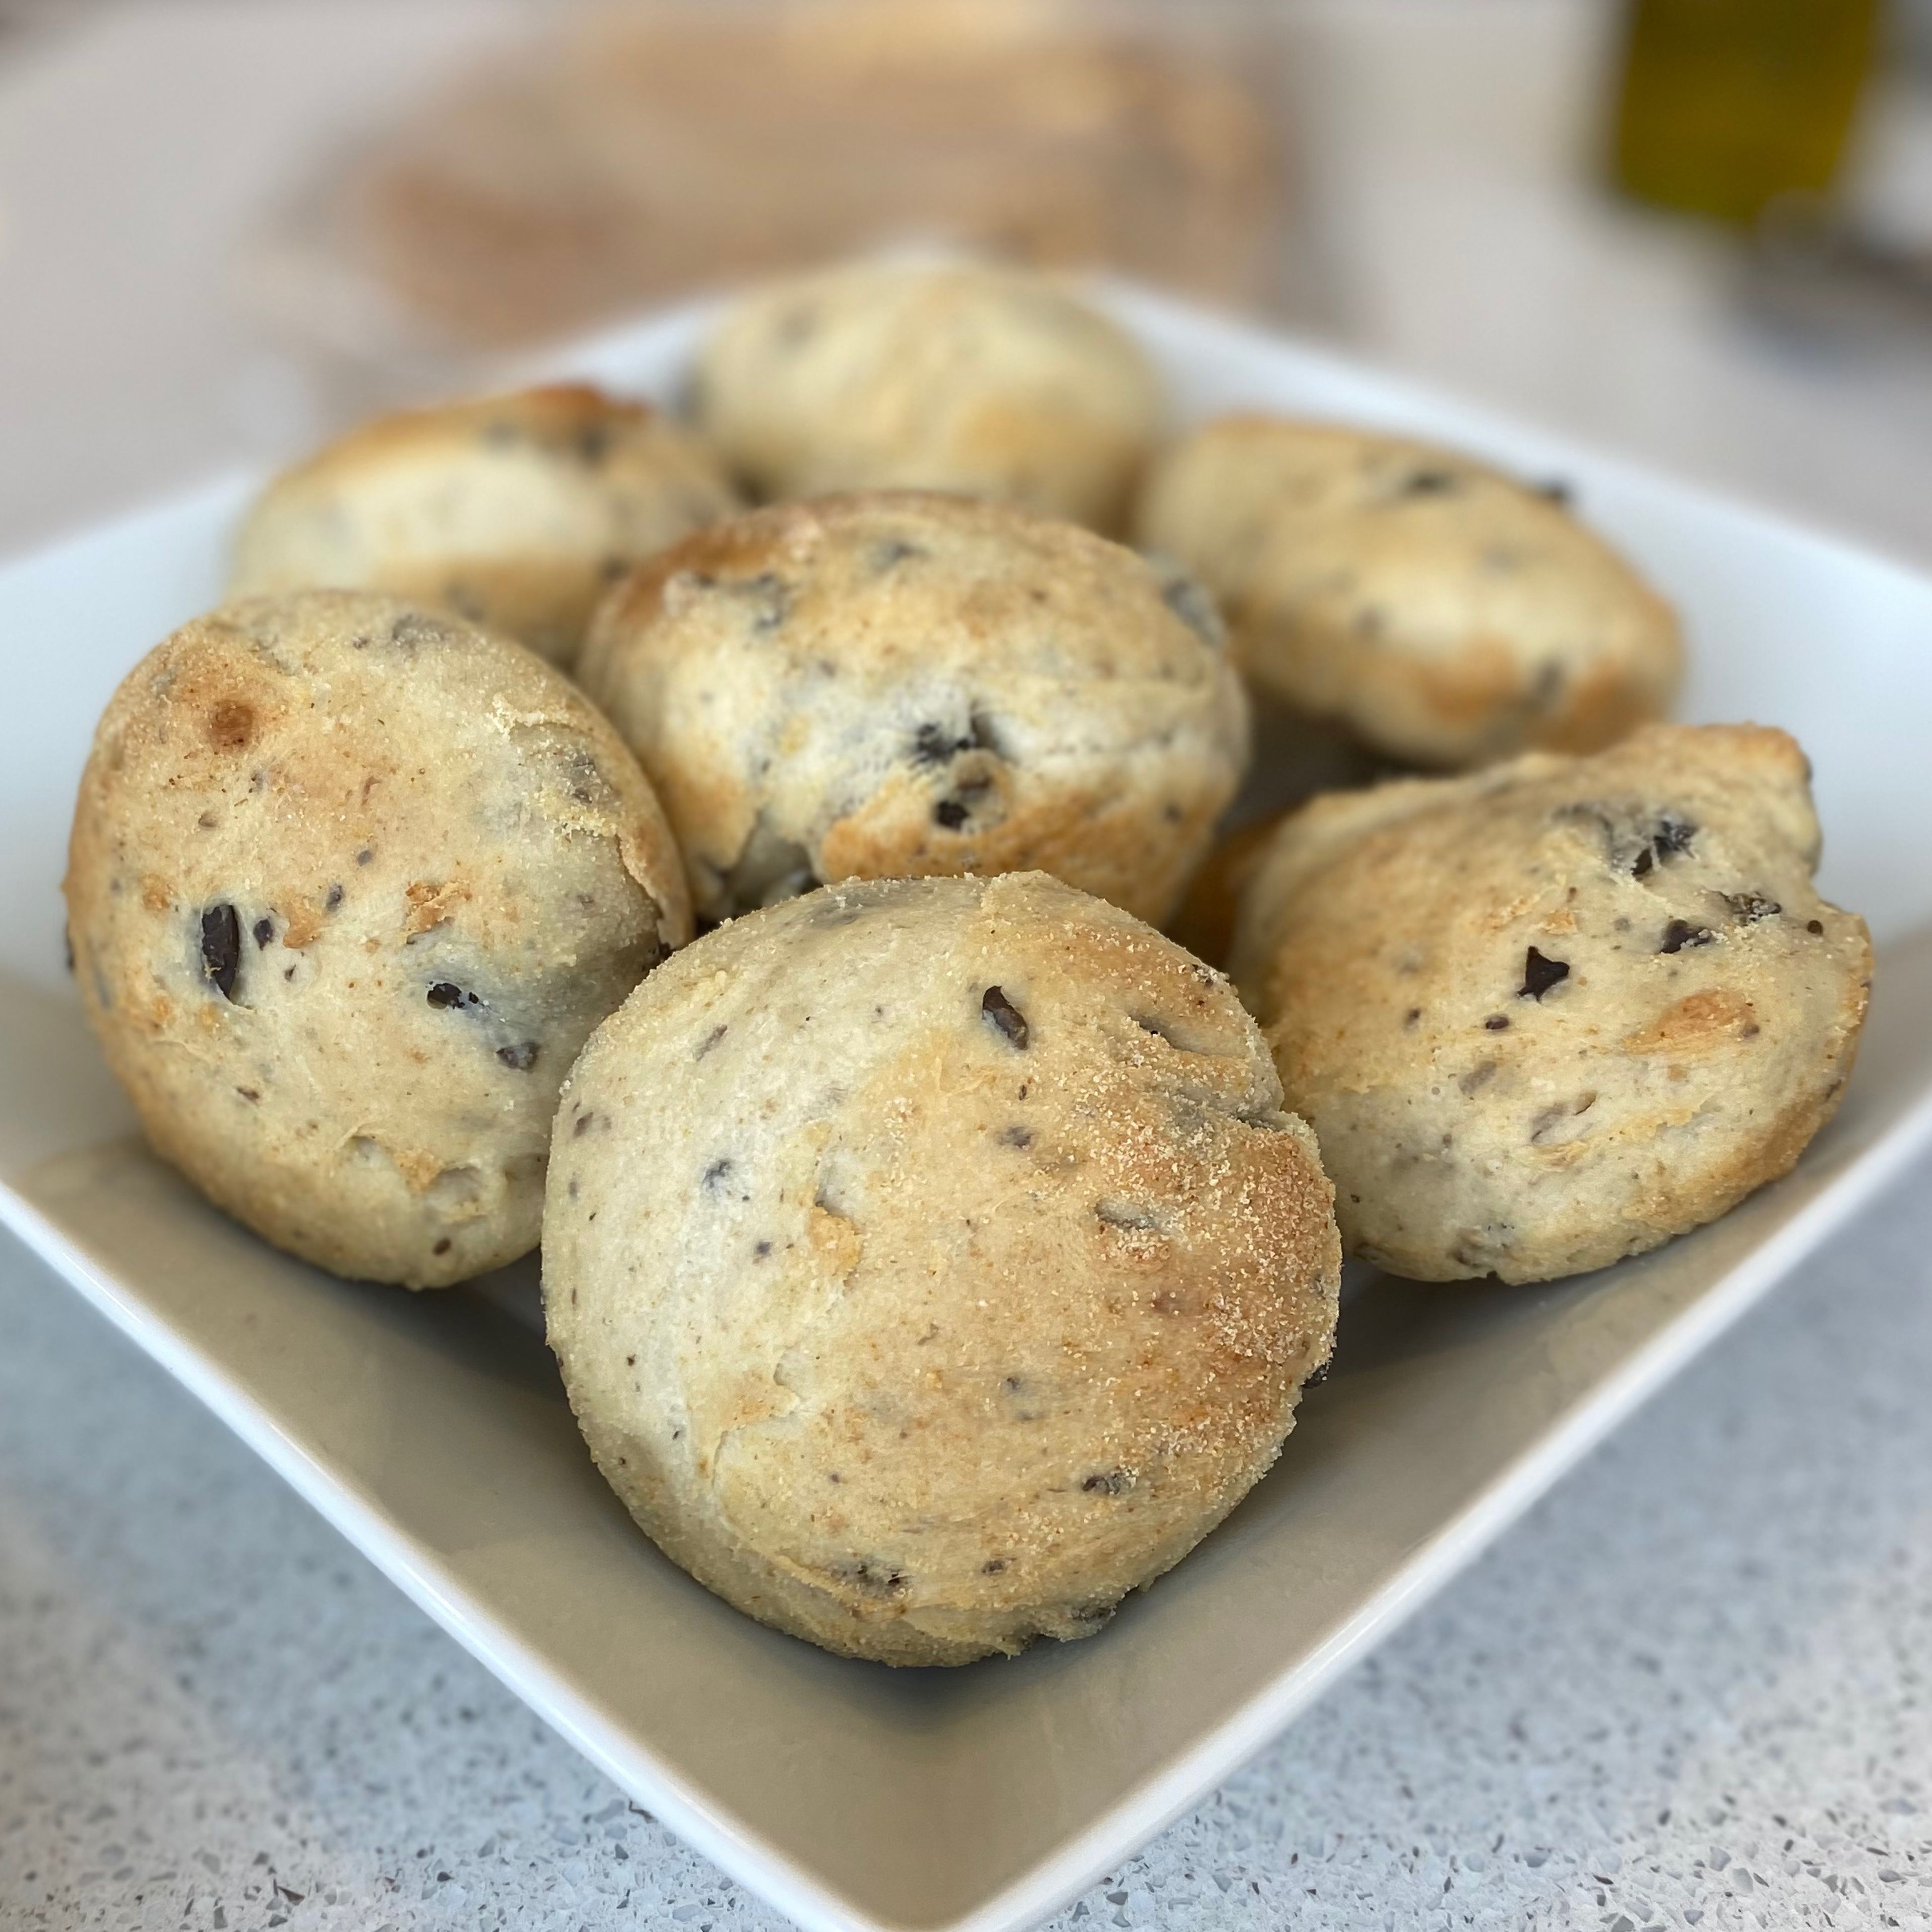 Bake at 240°C/465°F for 20-25 minutes, depending on pan size, or until golden brown. Remove from the oven and transfer to a wire rack to cool completely before serving.